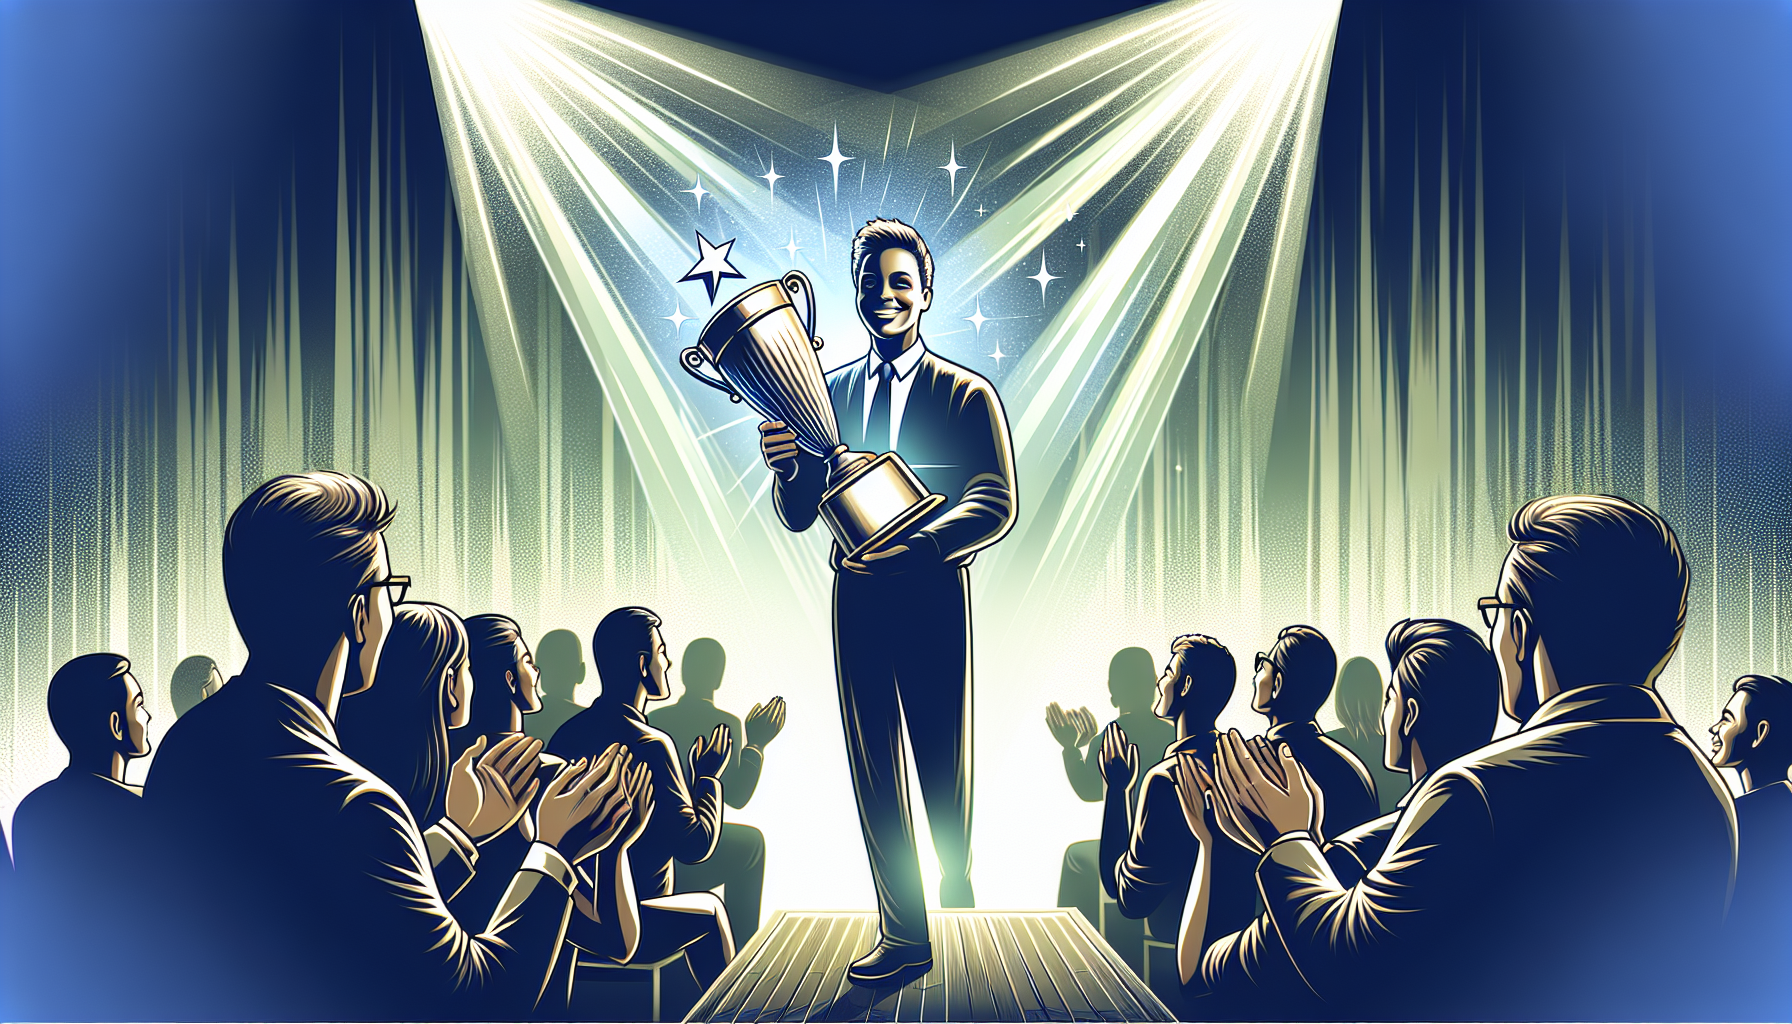 Illustration of an employee receiving recognition for their work